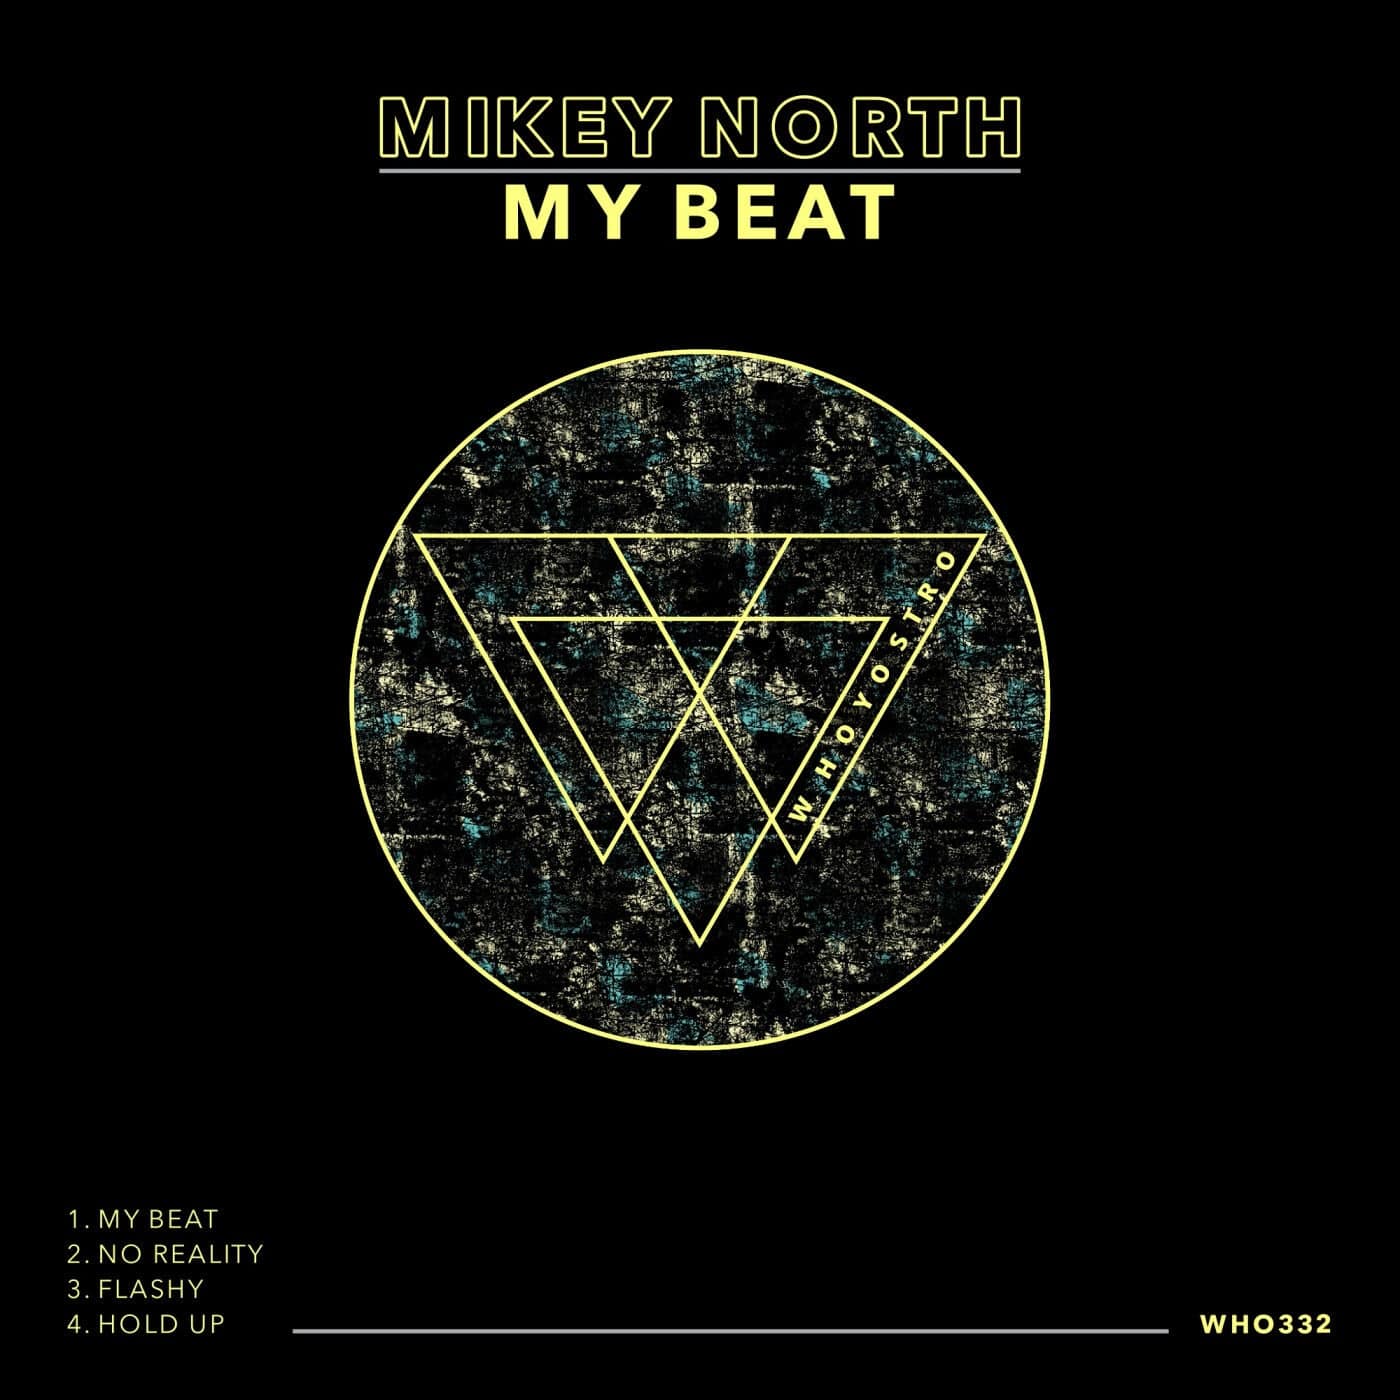 image cover: Mikey North - My Beat / WHO332